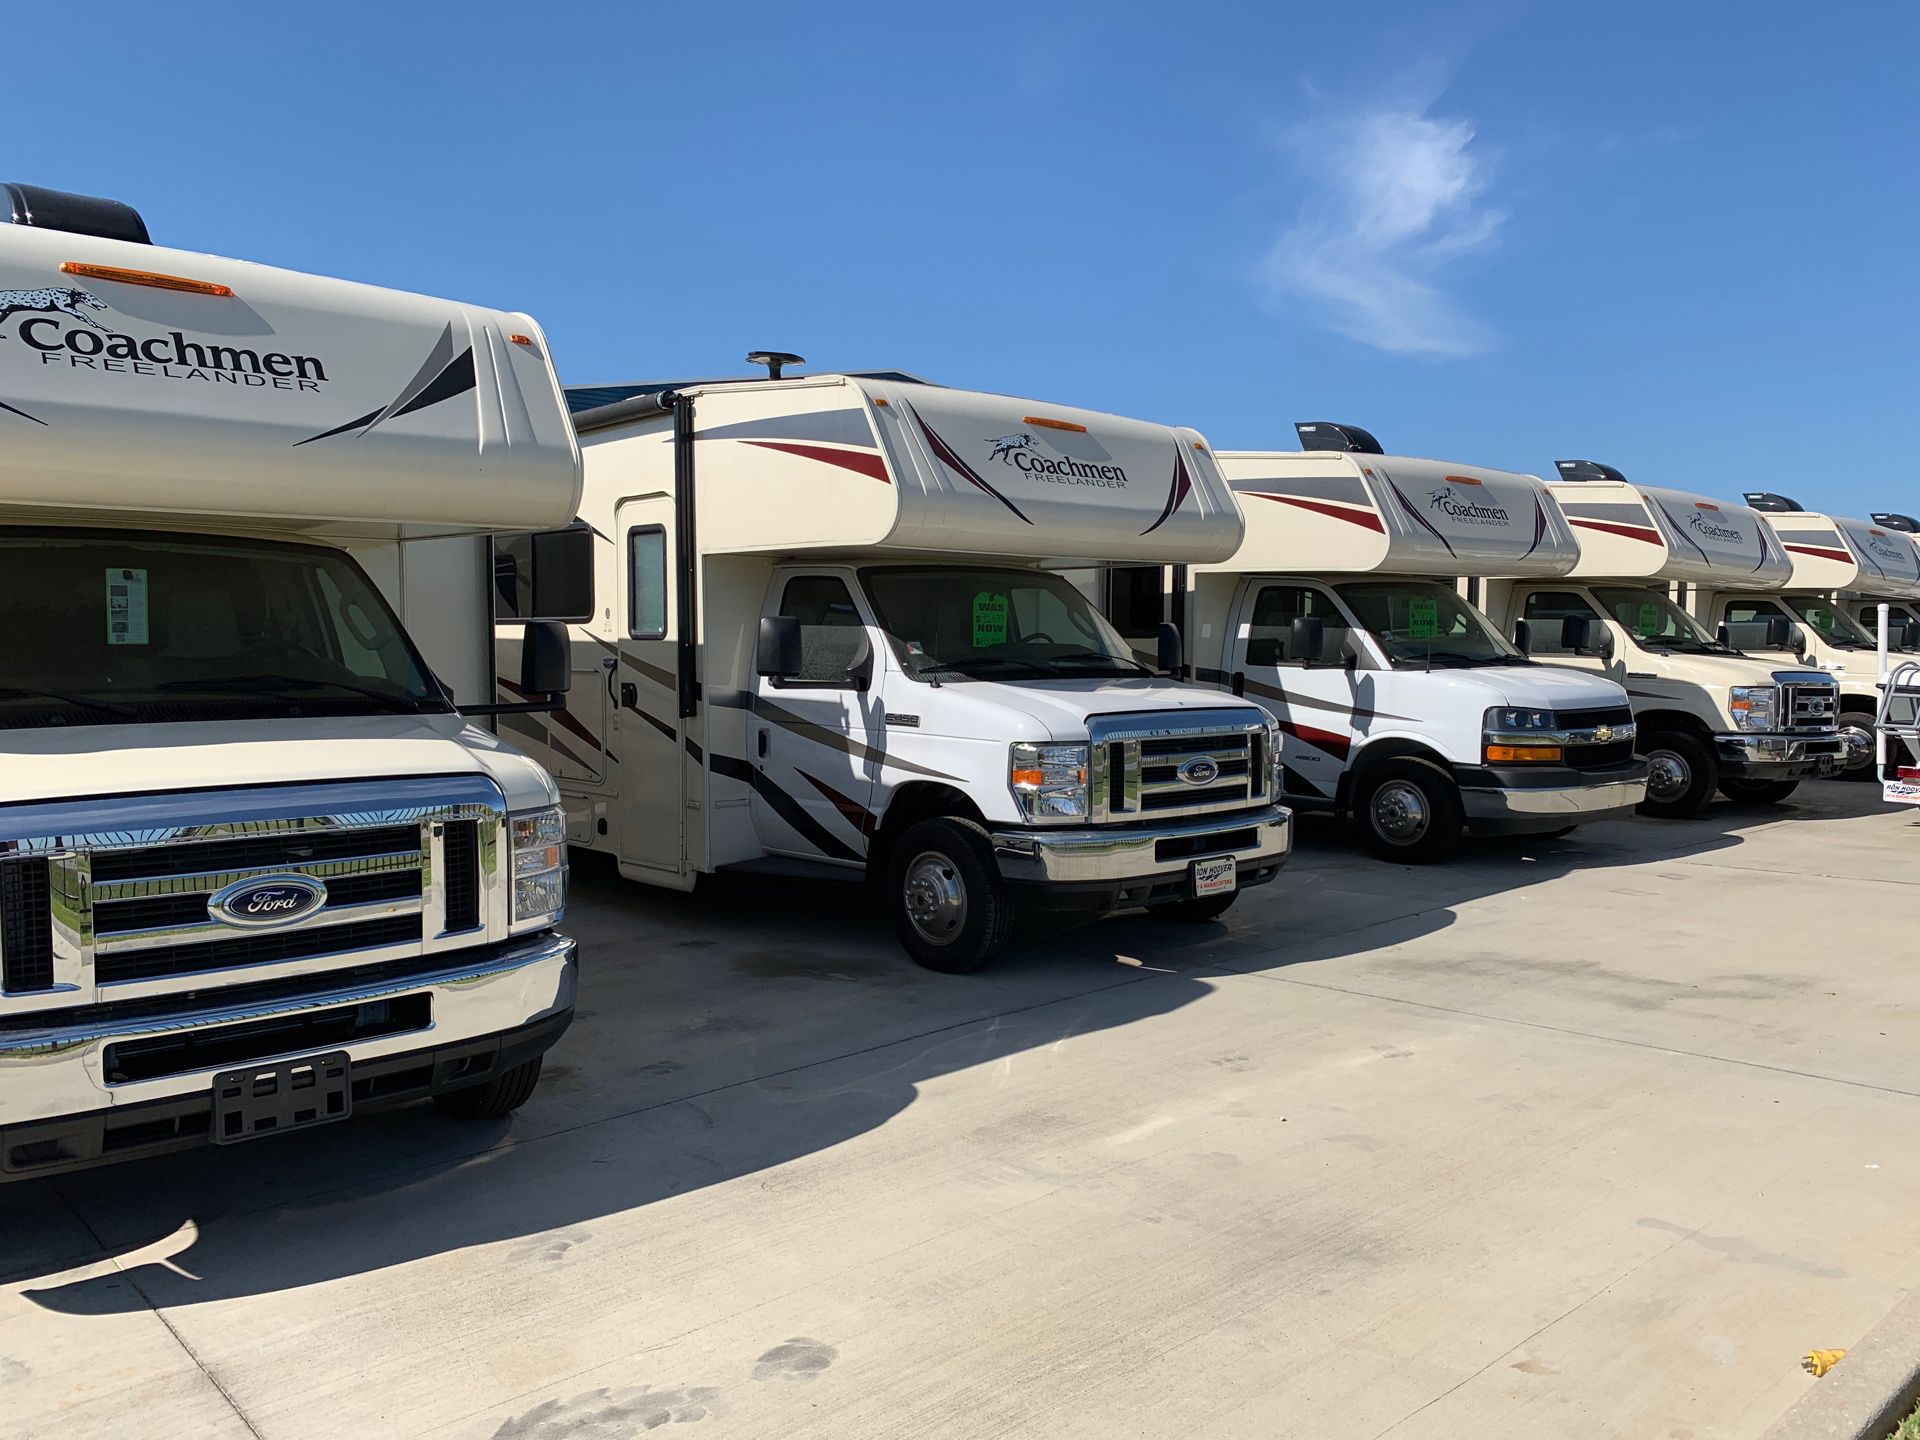 Brand new Class C motorhomes all on Clearance!